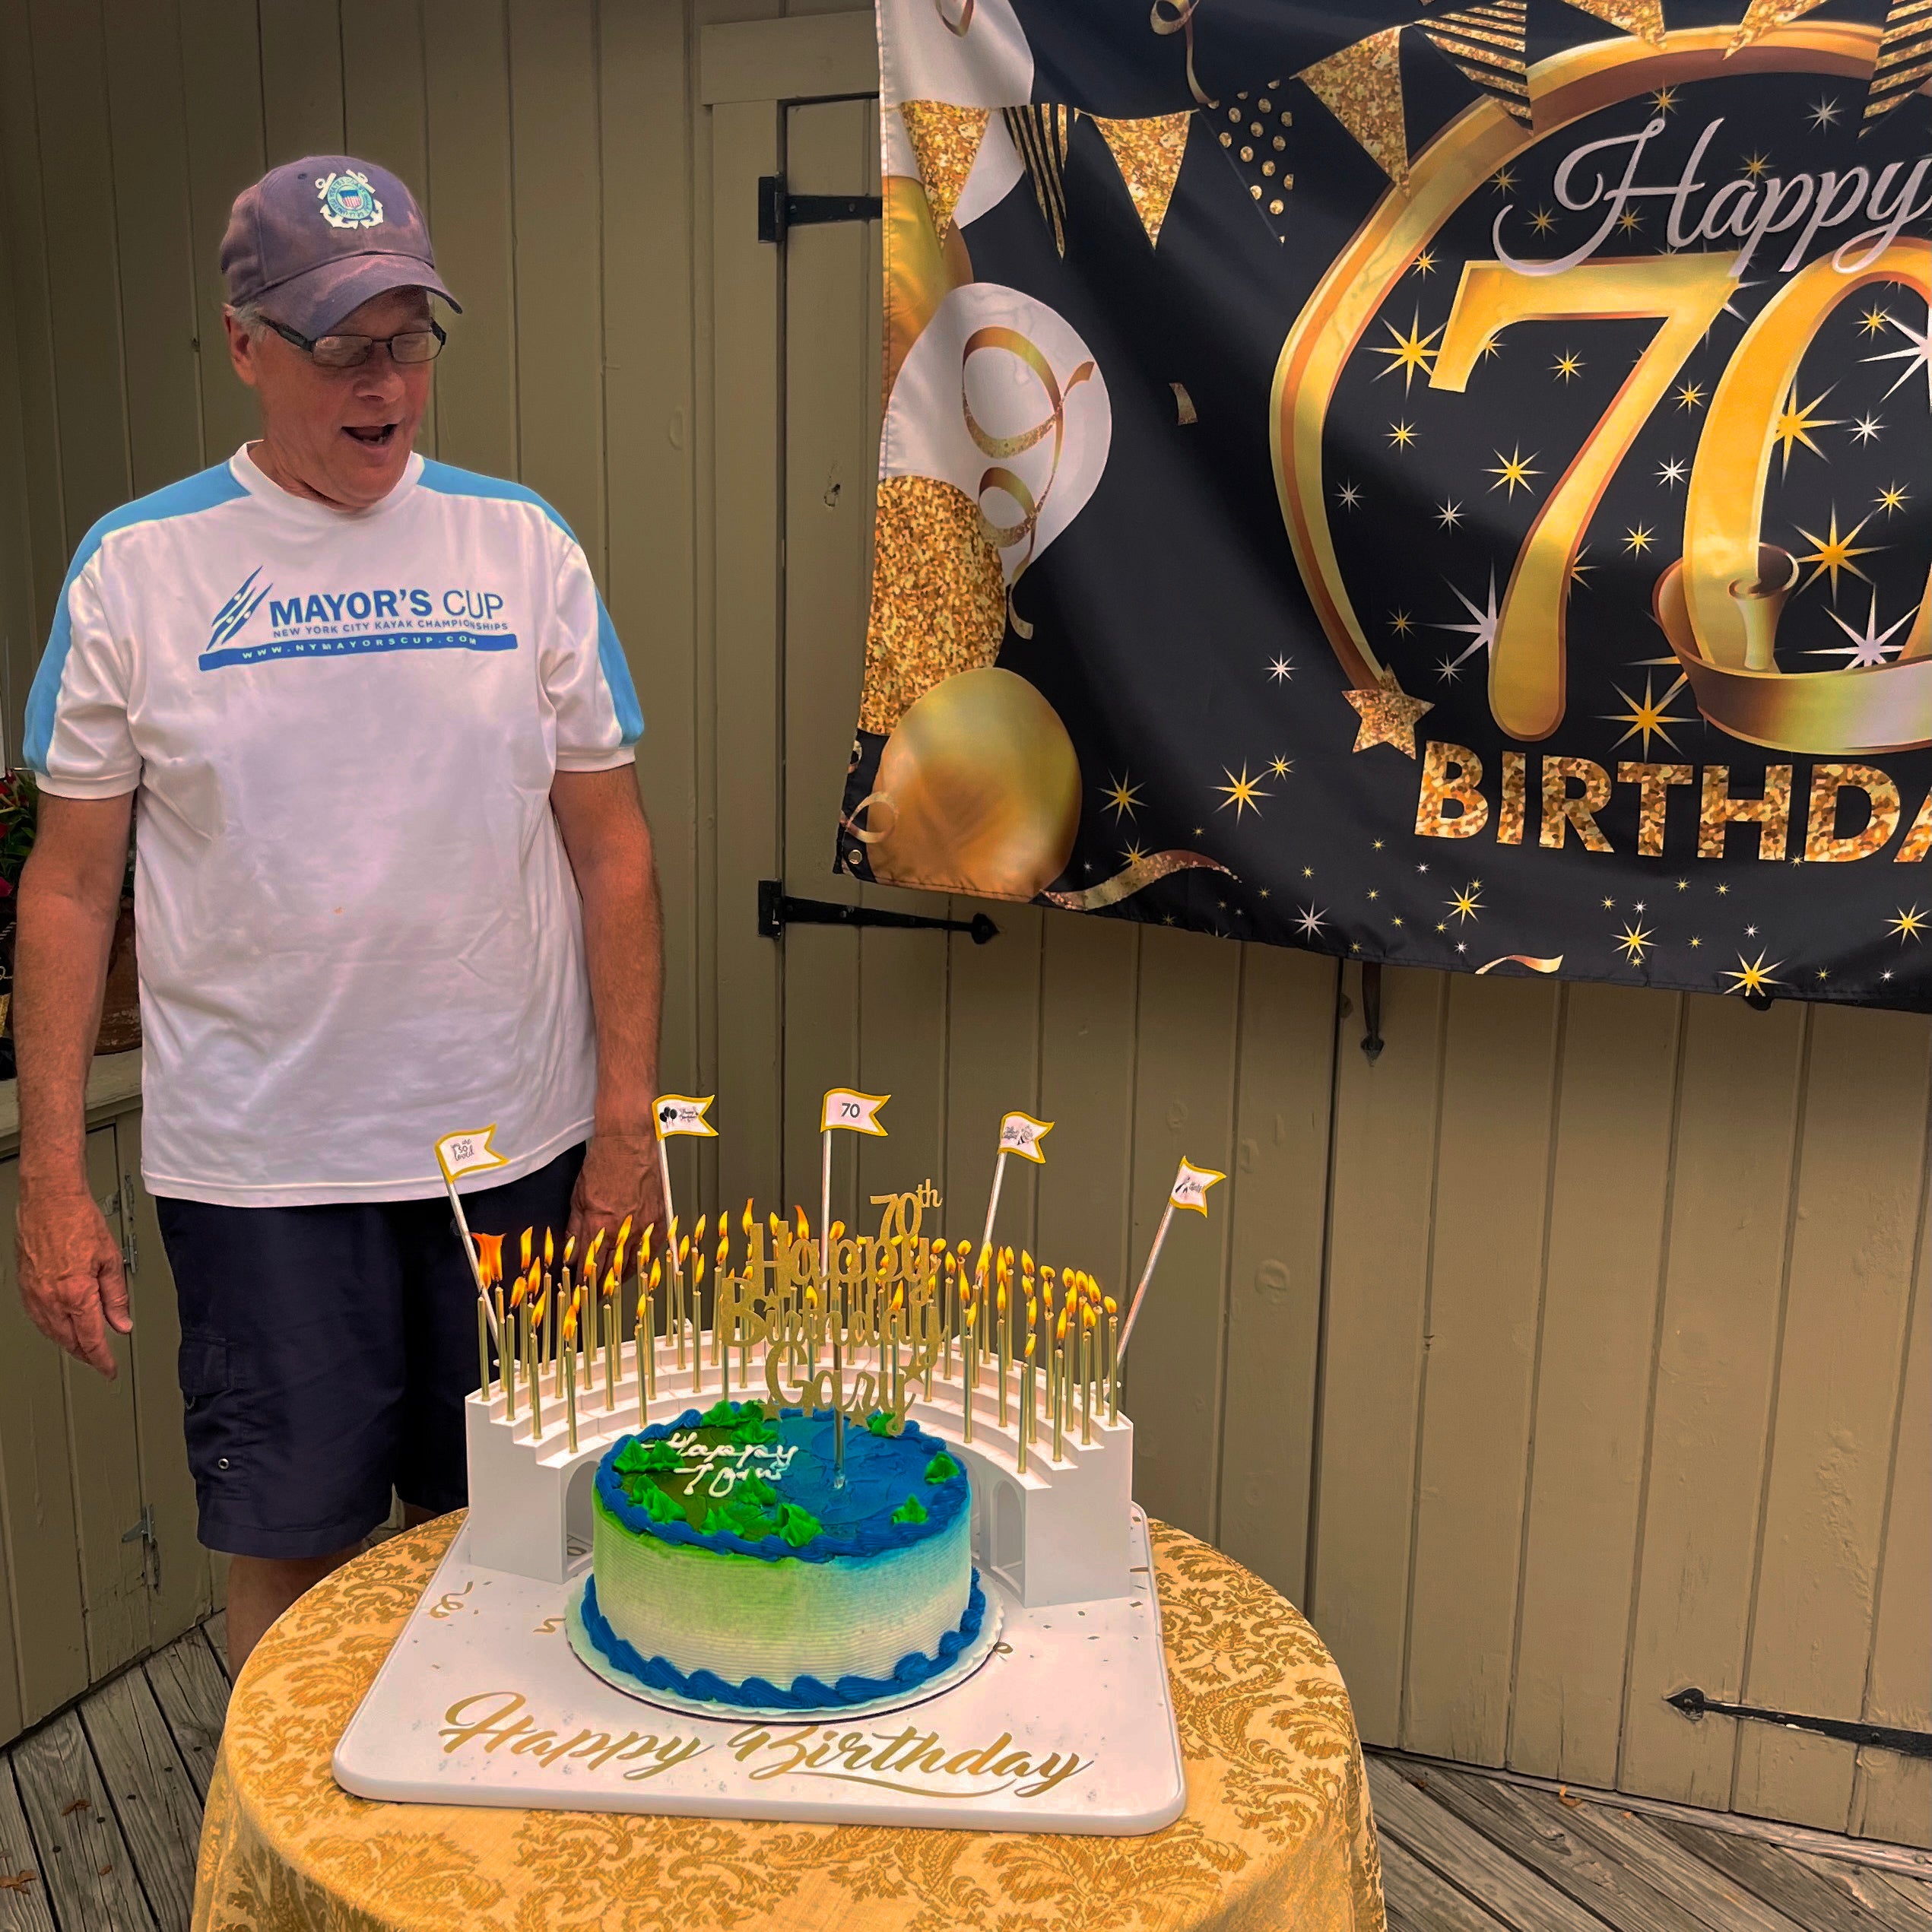 Outdoor 70th birthday surprise party with water-sports theme birthday cake.